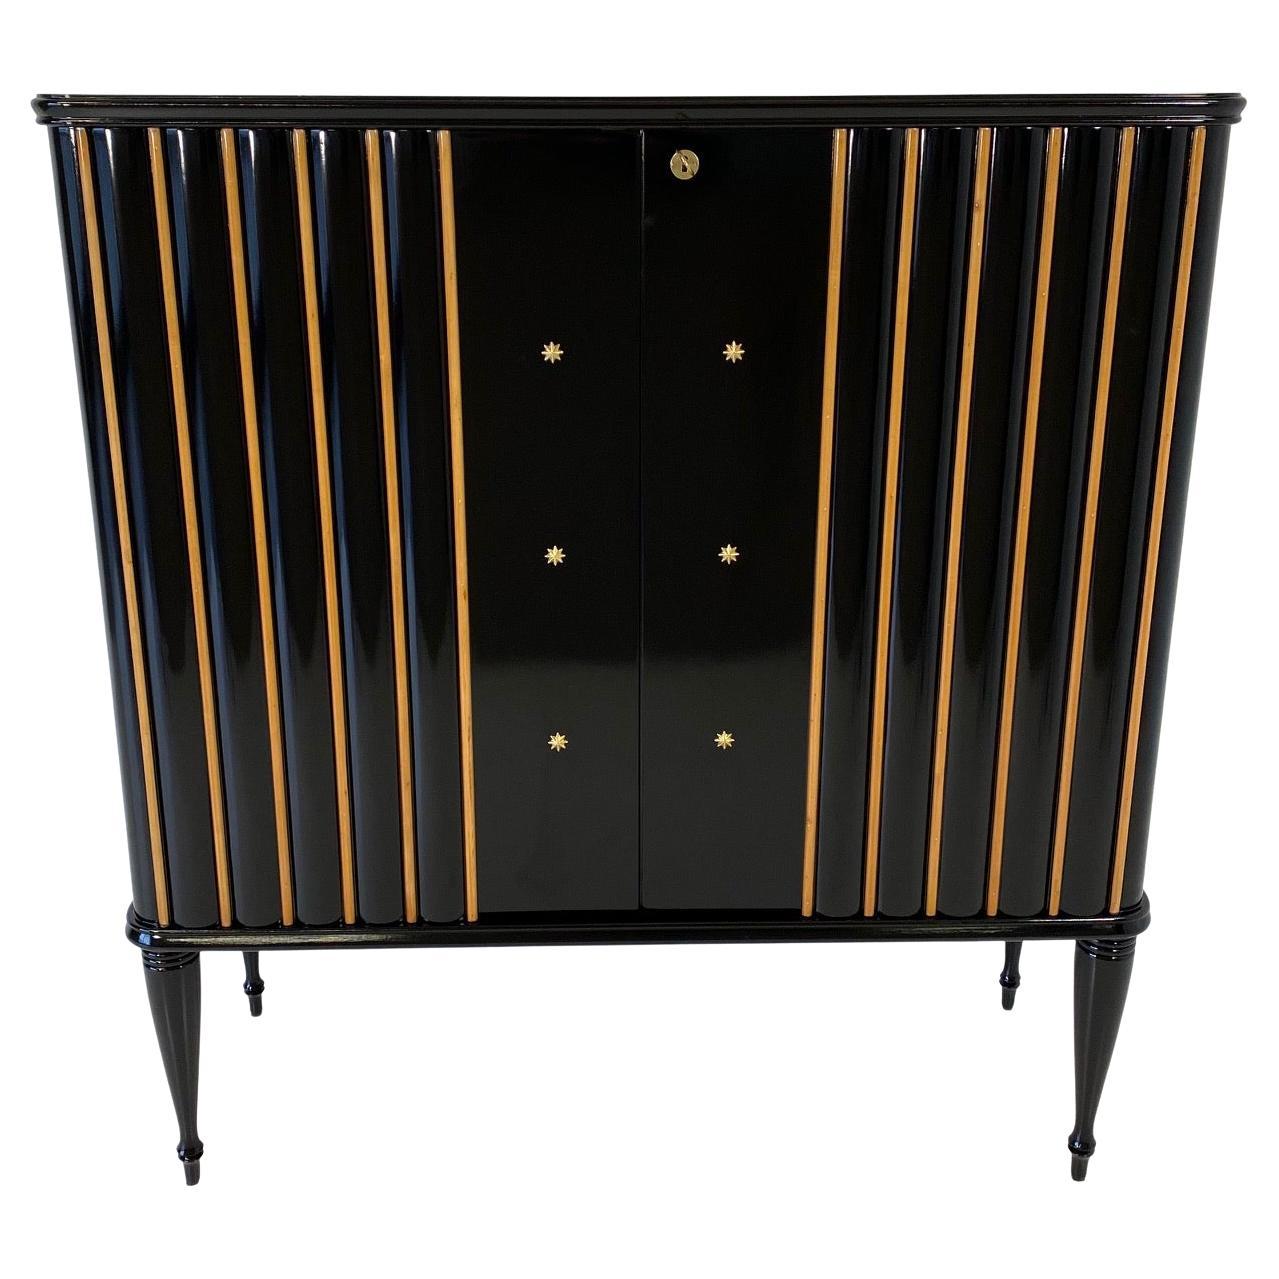 Italian Art Deco Black and Maple with Gold Details Cabinet, 1940s